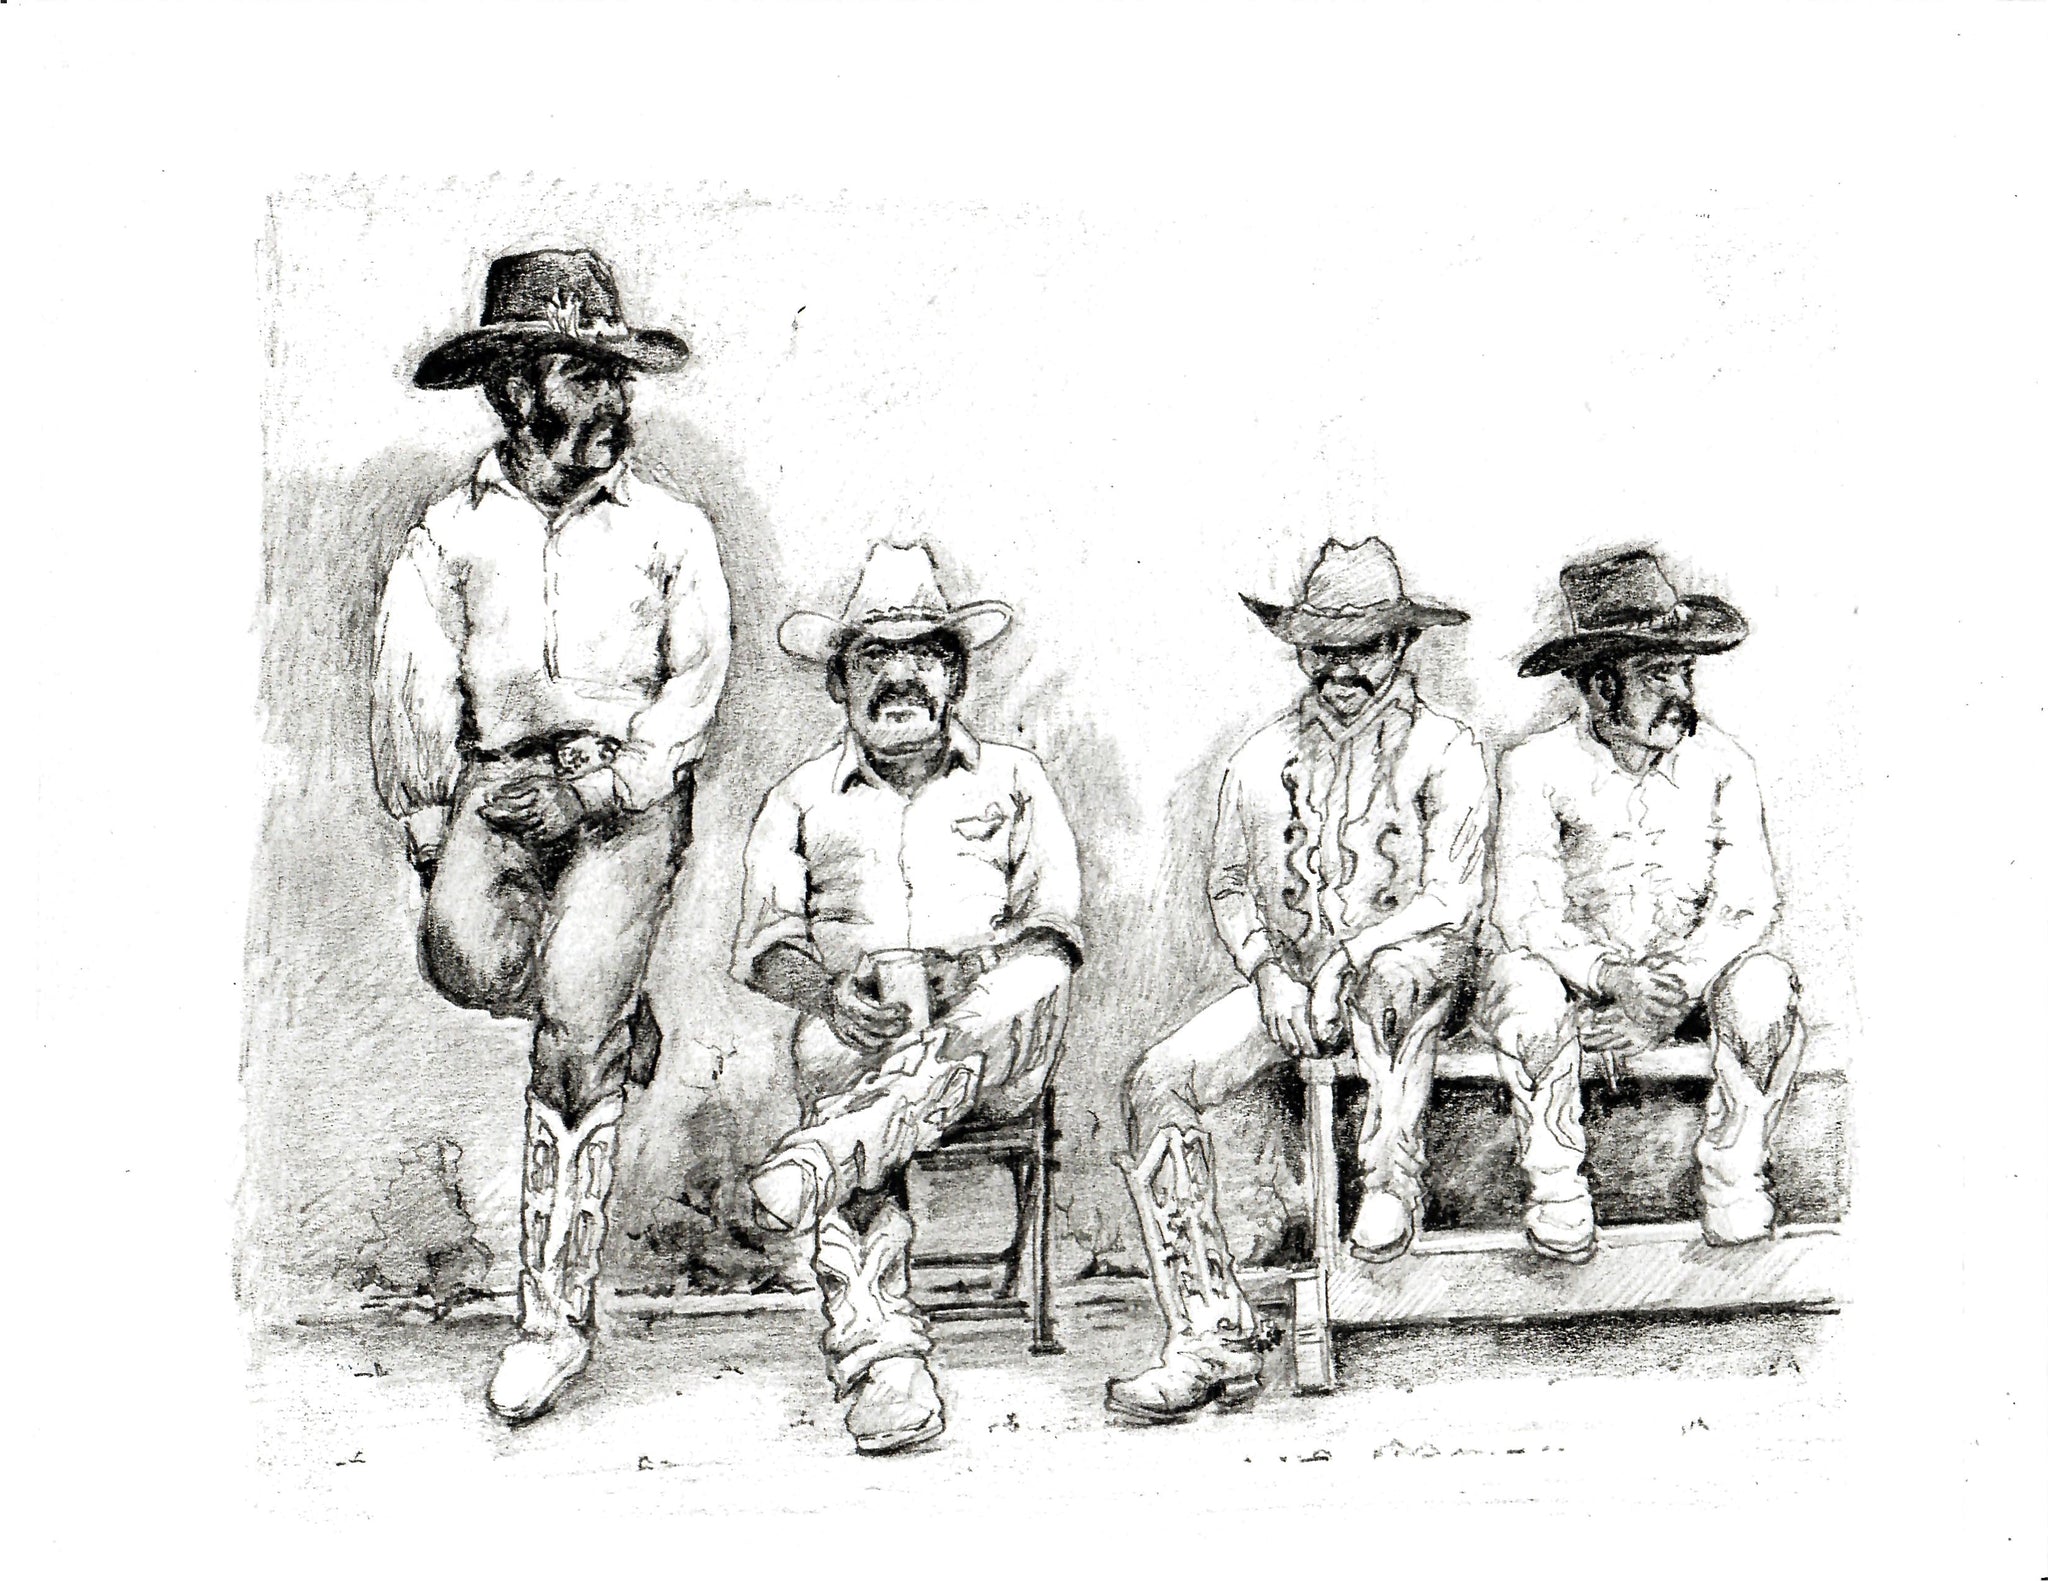 WESTERN - FOUR RESTING COWBOYS OUTSIDE AT WORK